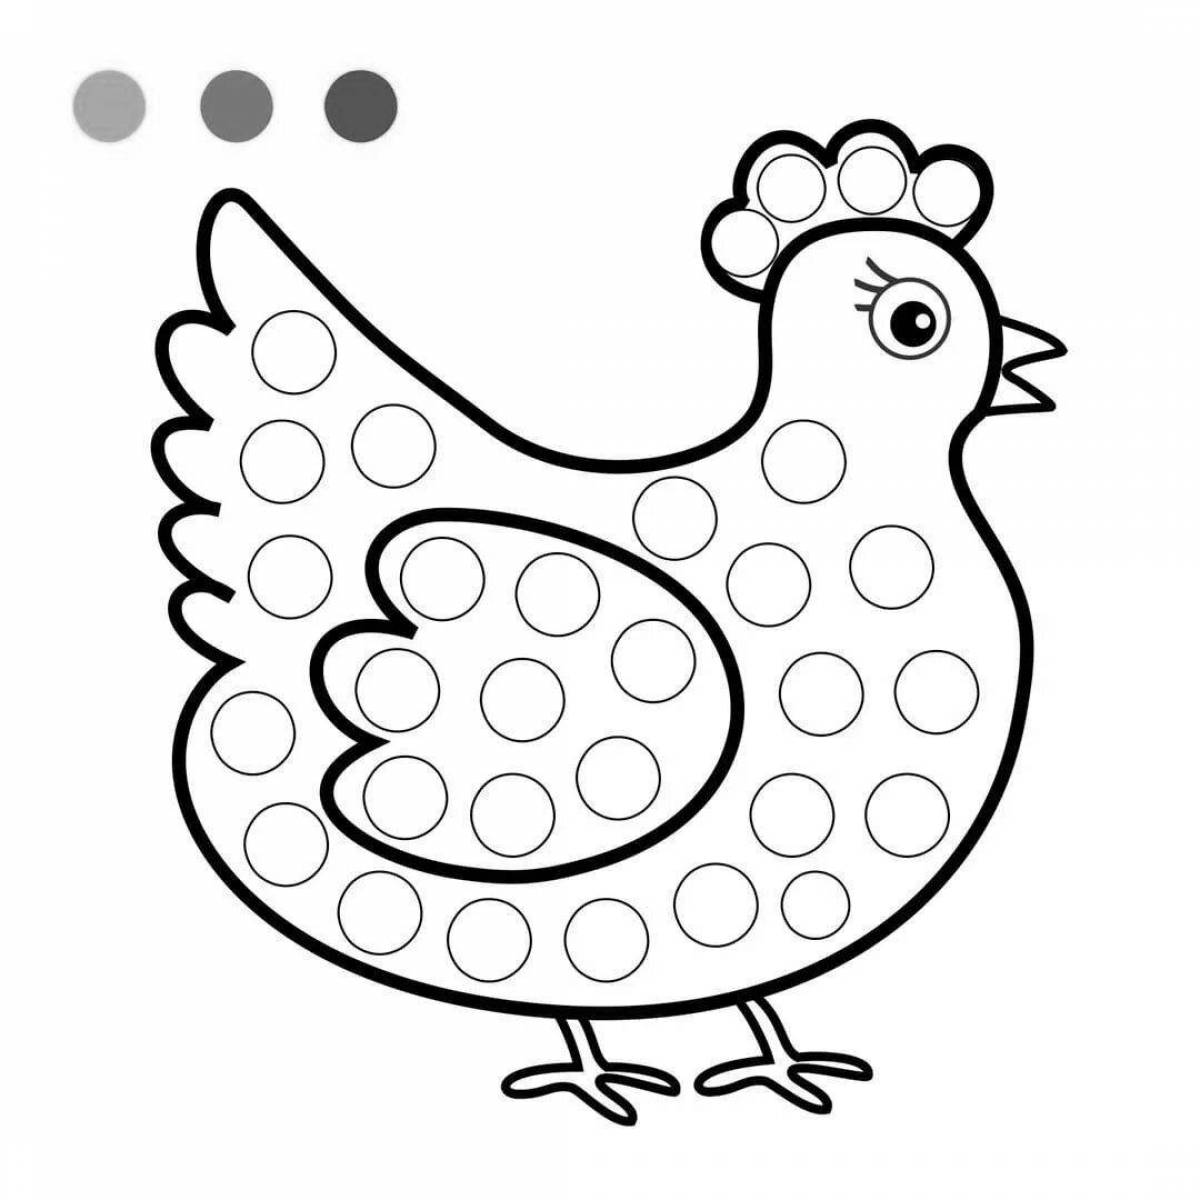 Sweet chick coloring page for 2-3 year olds